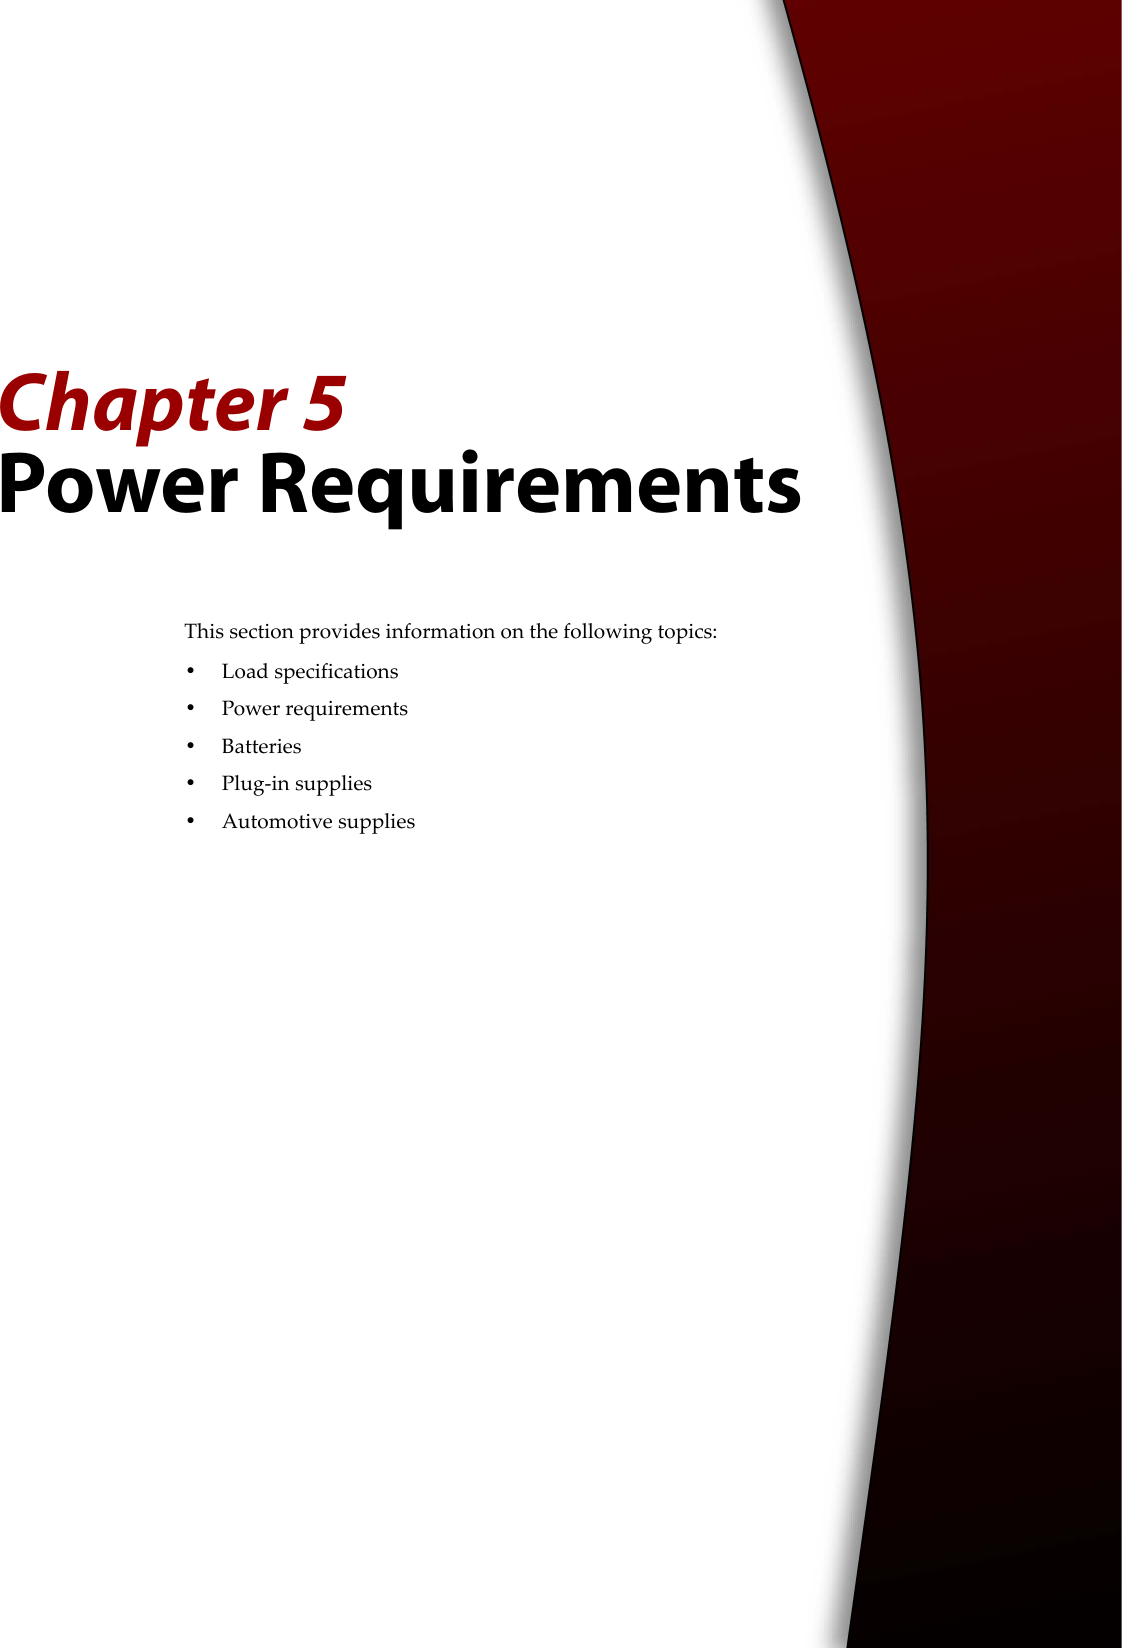 Chapter 5Power RequirementsThis section provides information on the following topics:•Load specifications•Power requirements•Batteries•Plug-in supplies•Automotive supplies